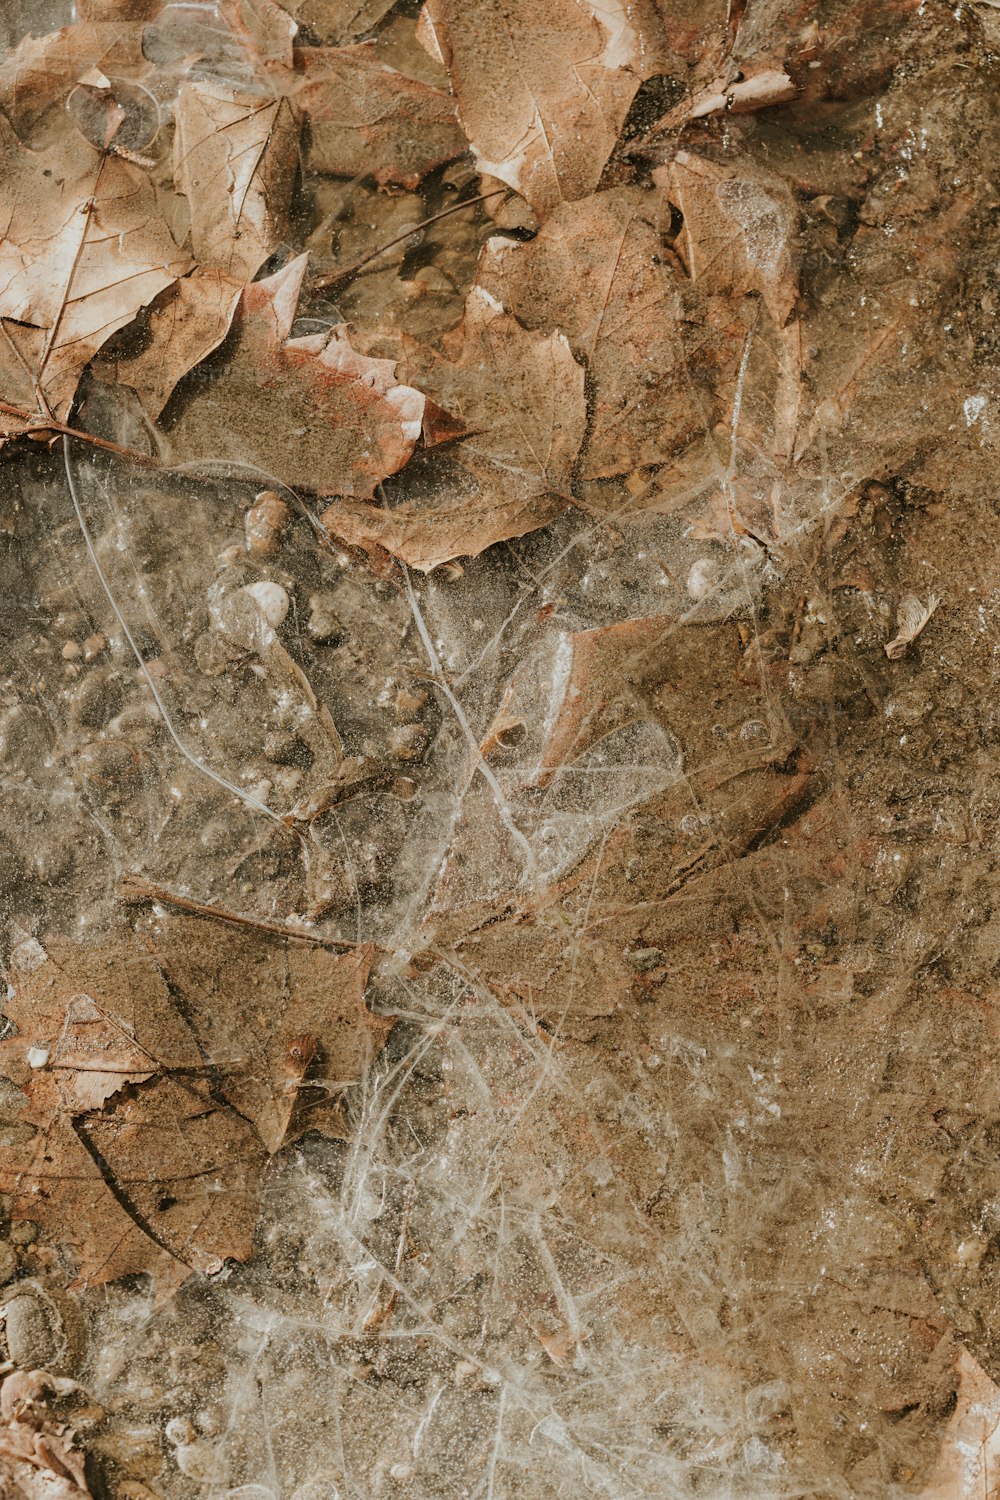 a close up of leaves and dirt on the ground